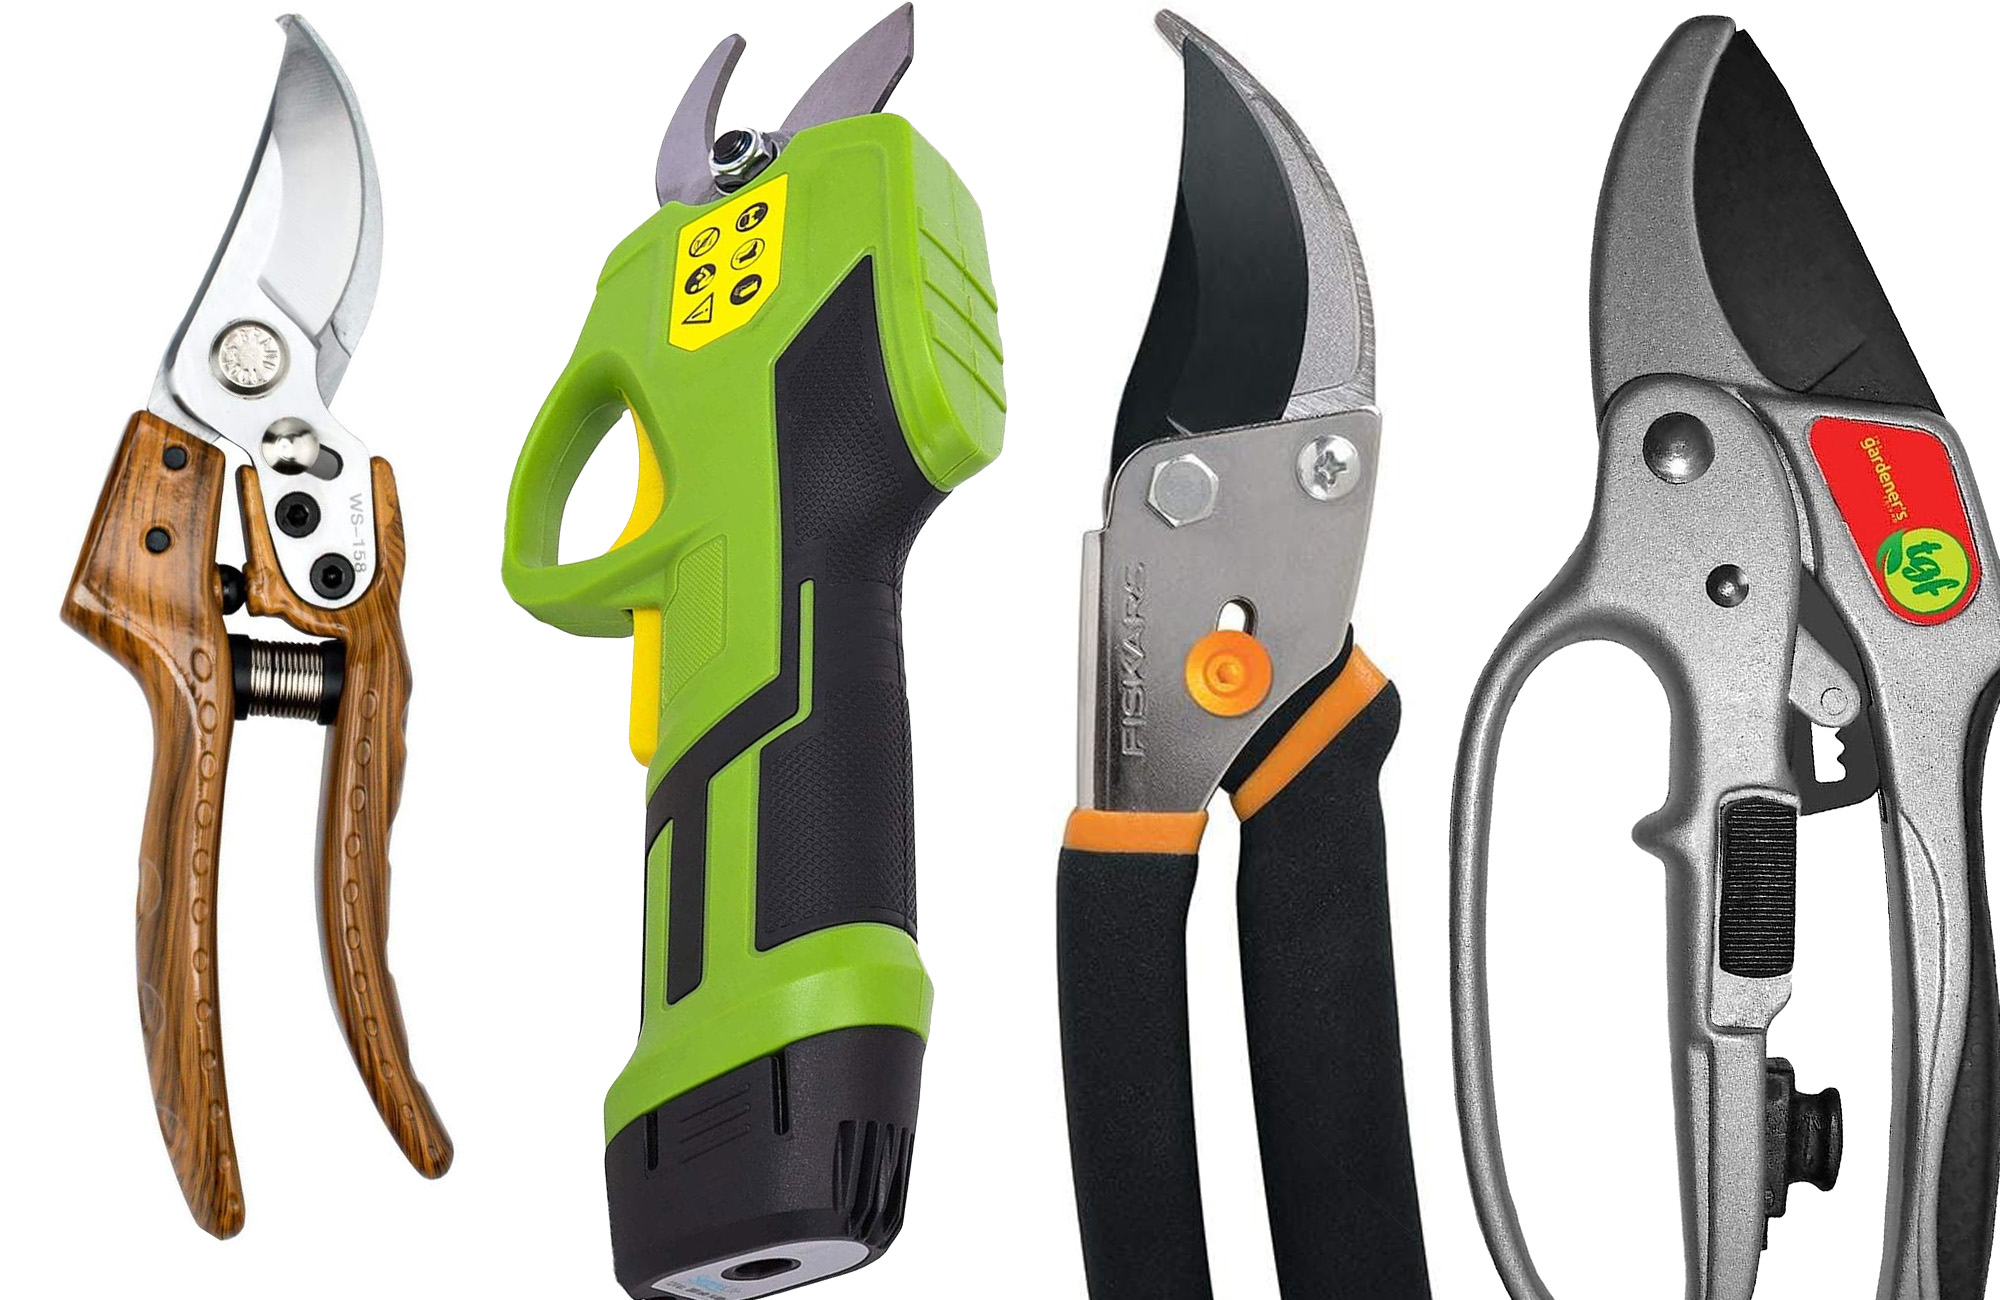 How to Clean and Care for Garden Pruners and Secateurs